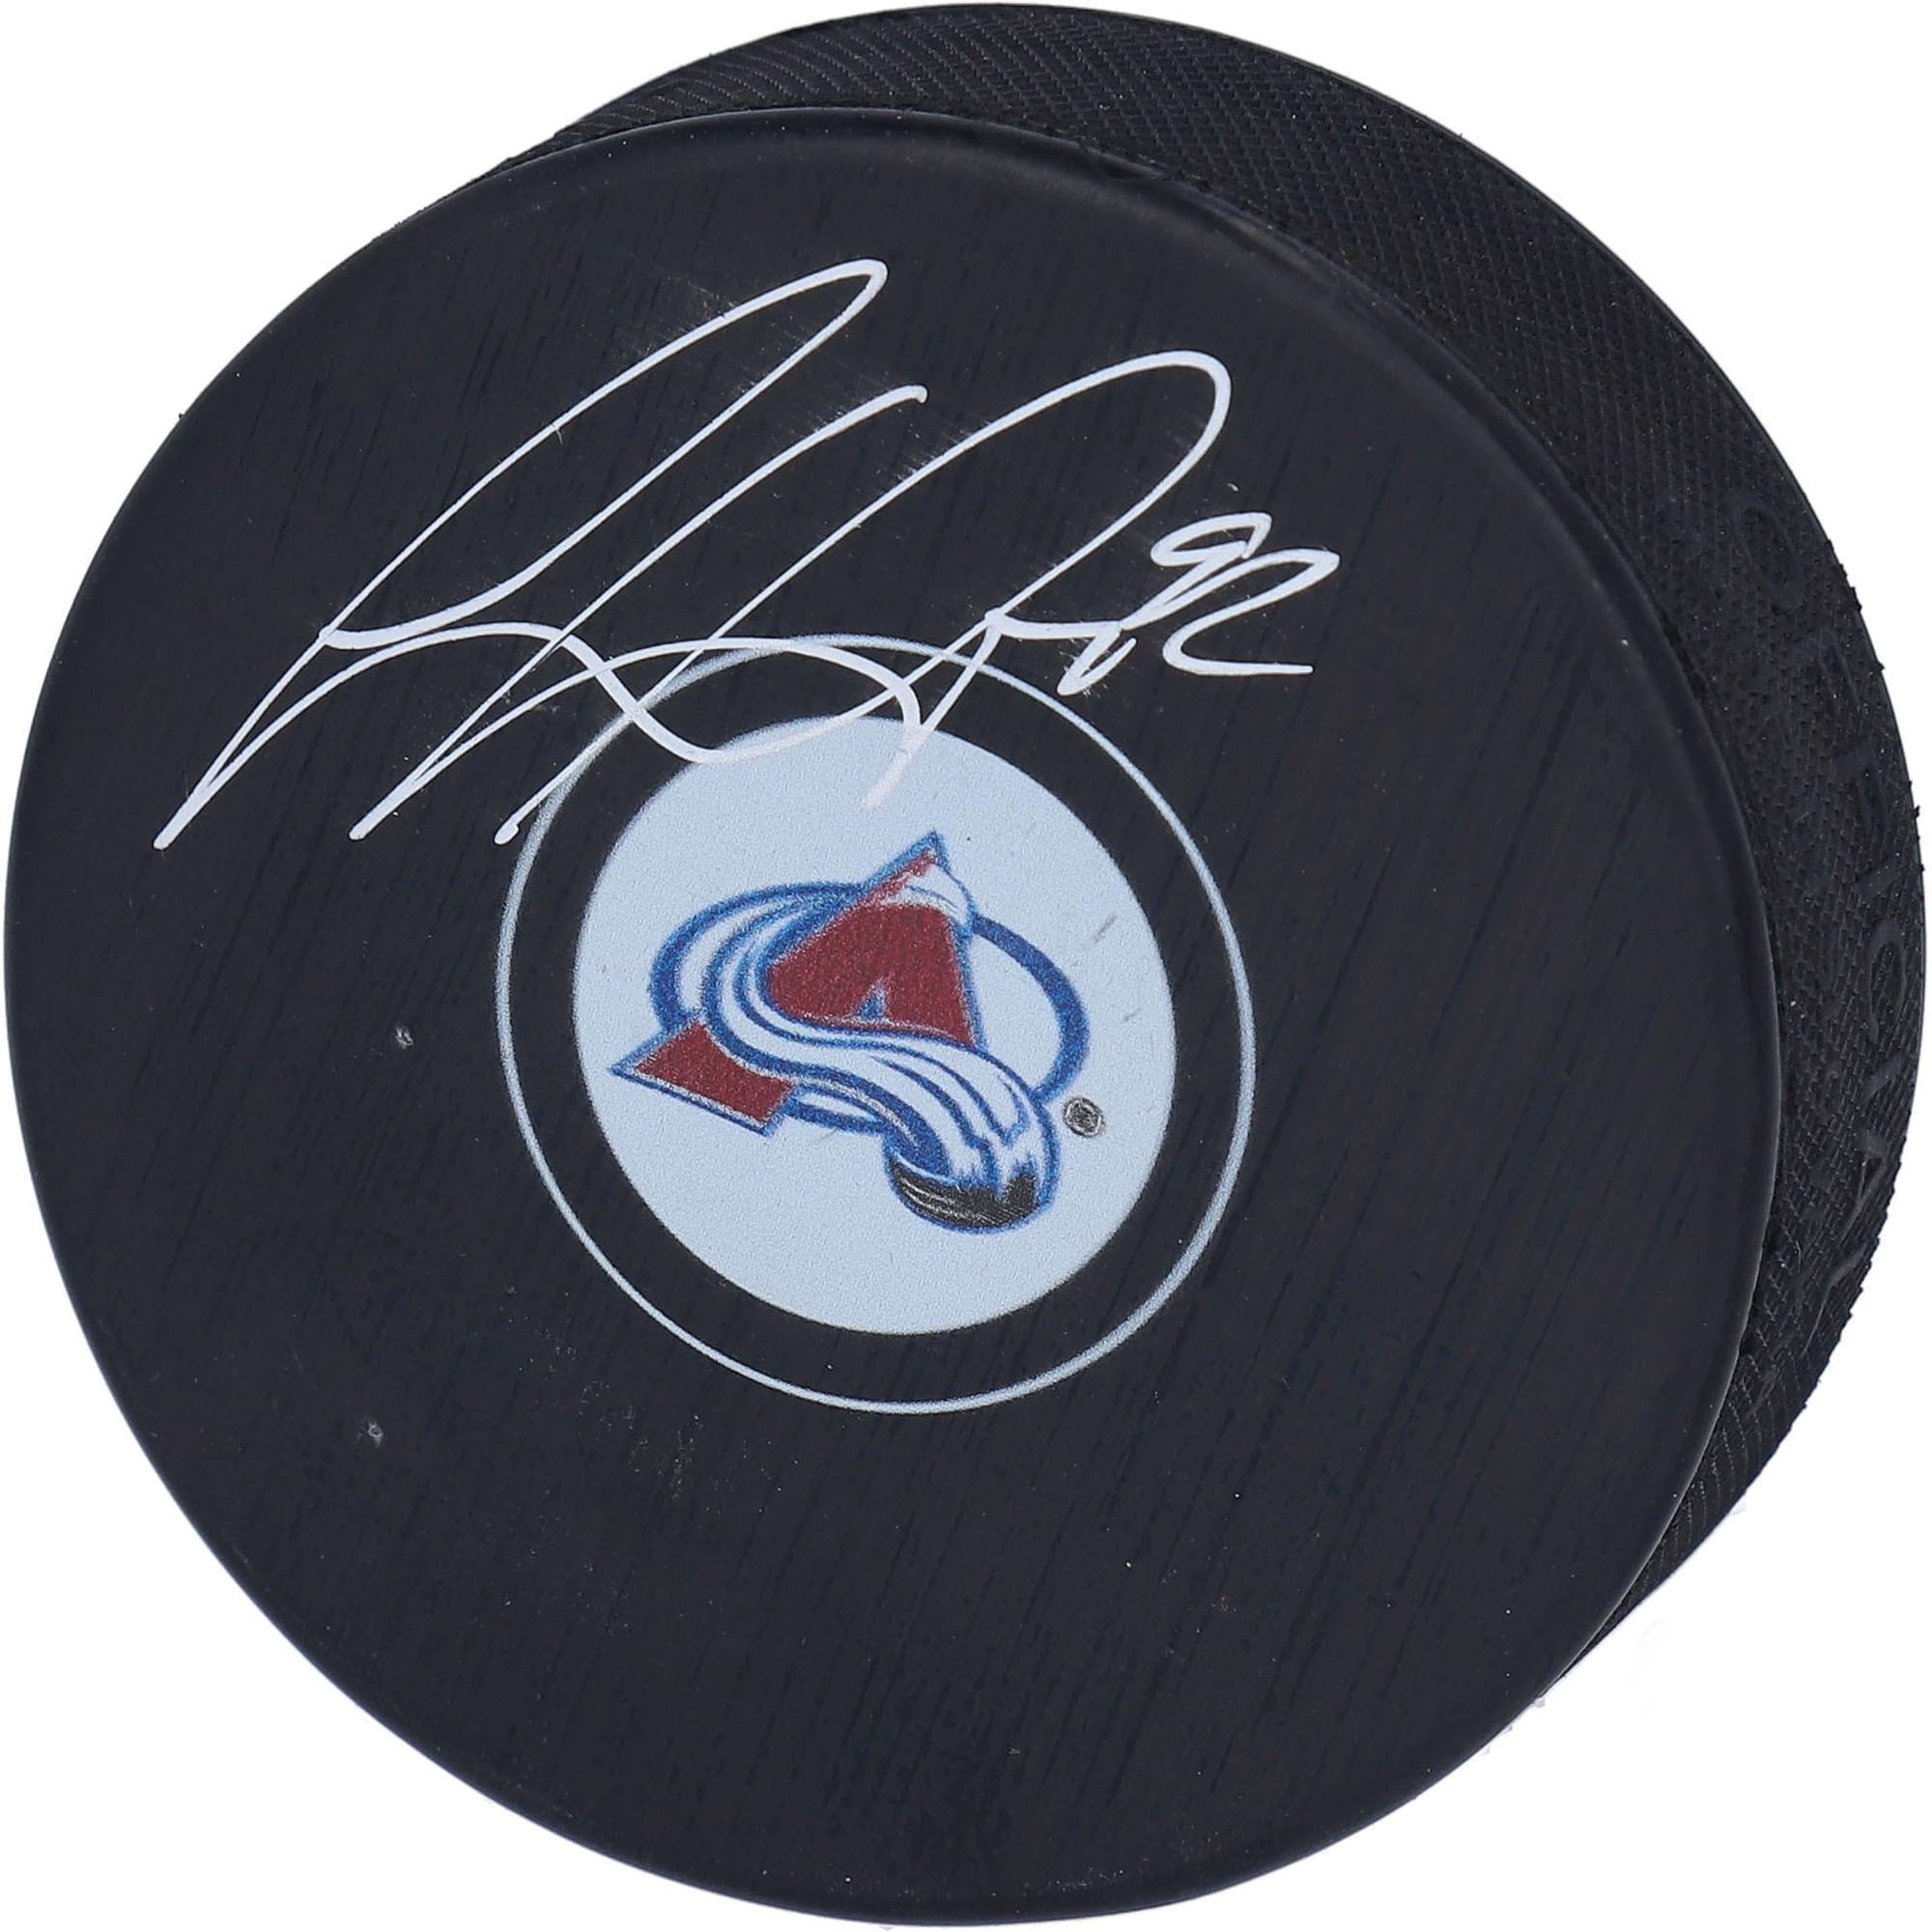 Fanatics Authentic Certified Unsigned Pucks Colorado Avalanche Unsigned InGlasCo Autograph Model Hockey Puck 